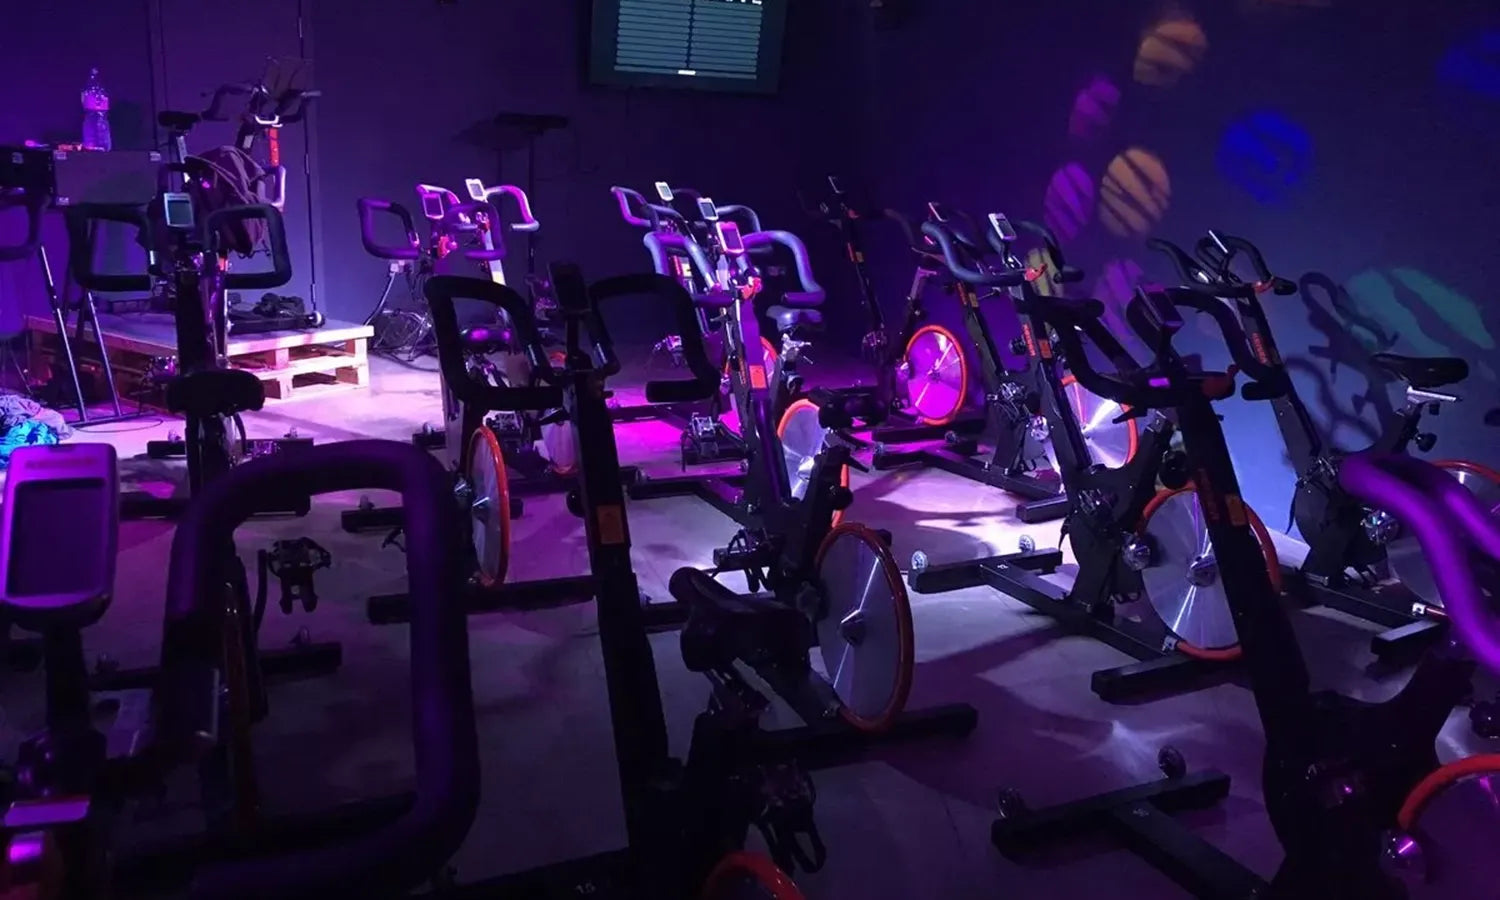 This New Fitness Studio in West Philly Blends Wellness and Workouts